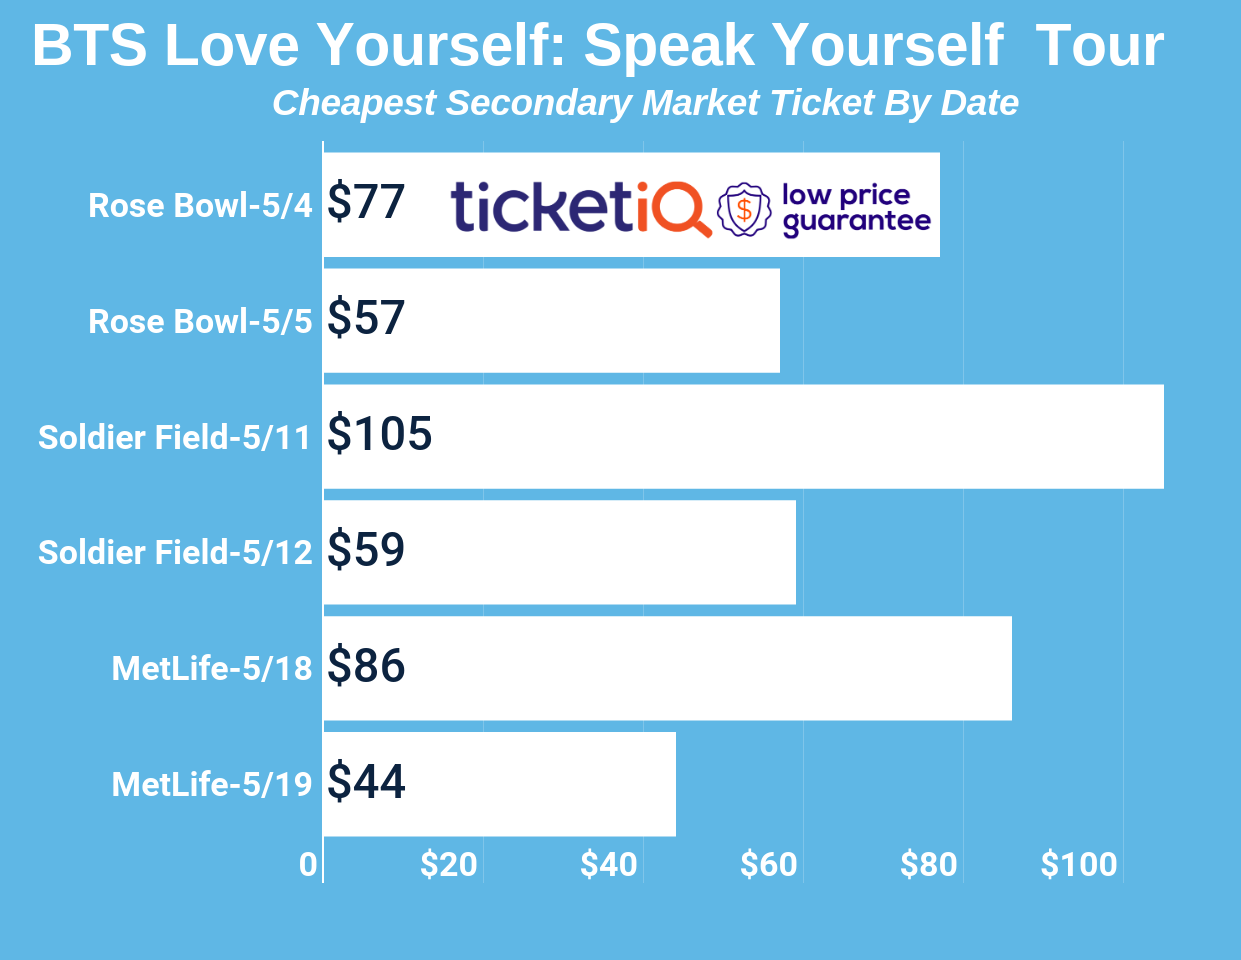 Ticket Prices For BTS 2019 Love Yourself: Speak Yourself Are Cheap Compared to 20181241 x 960